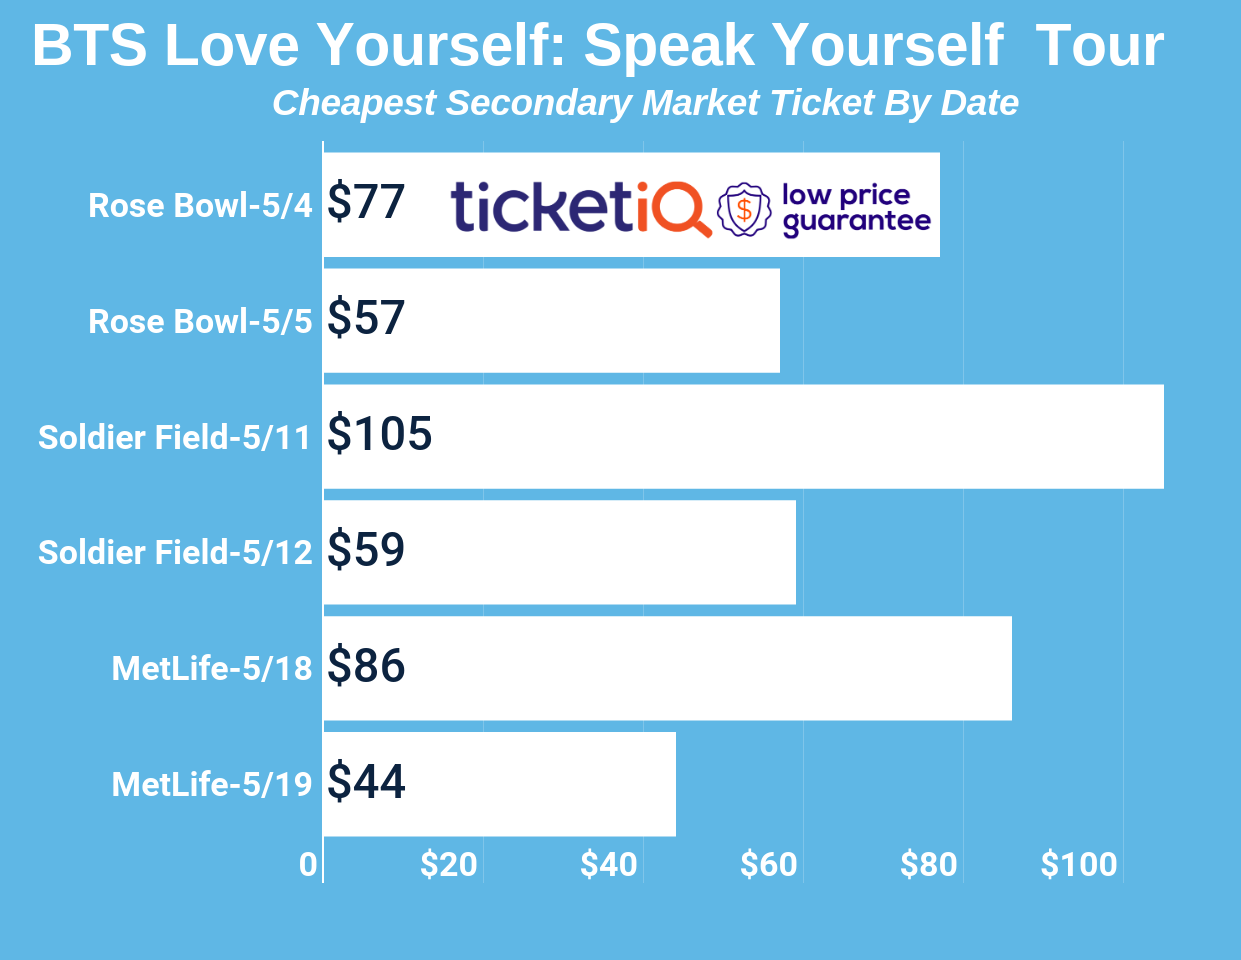 Ticket Prices For BTS 2019 Love Yourself: Speak Yourself Are Cheap Compared to 20181241 x 960